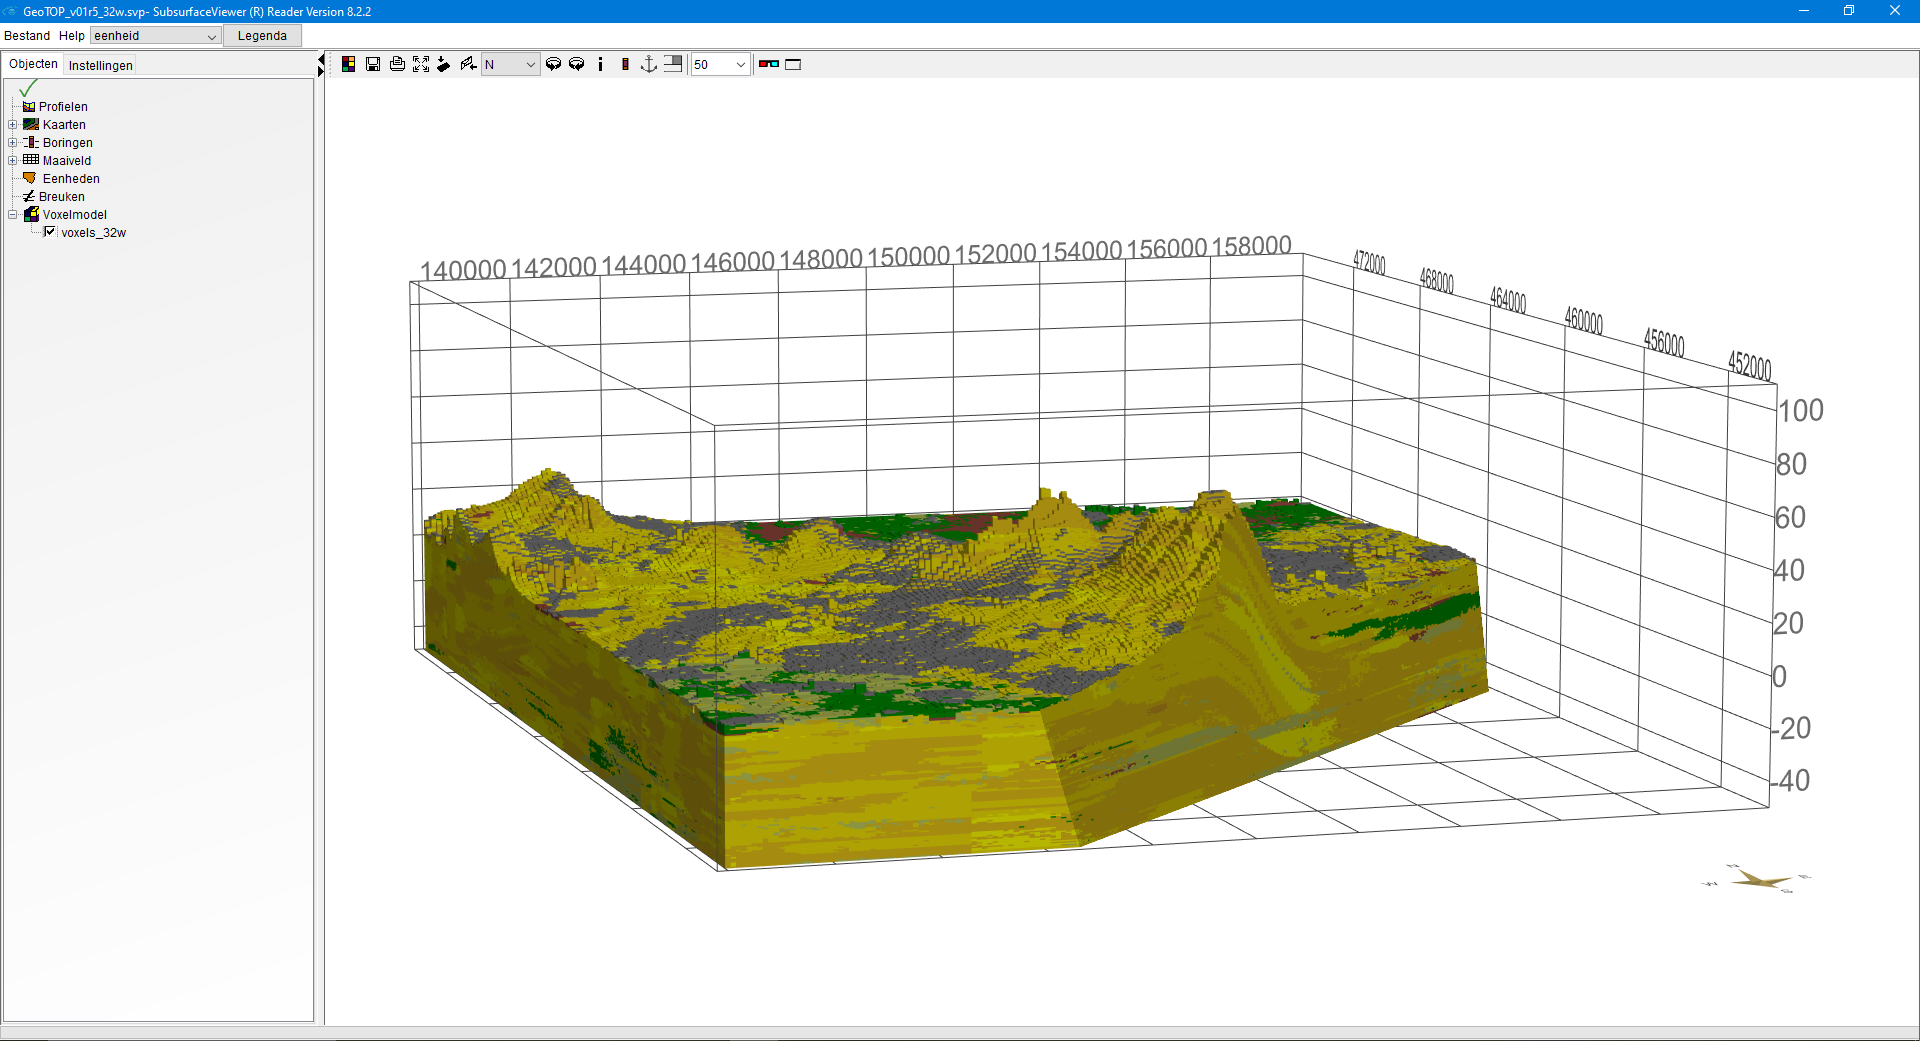 GeoTOP in SubsurfaceViewer